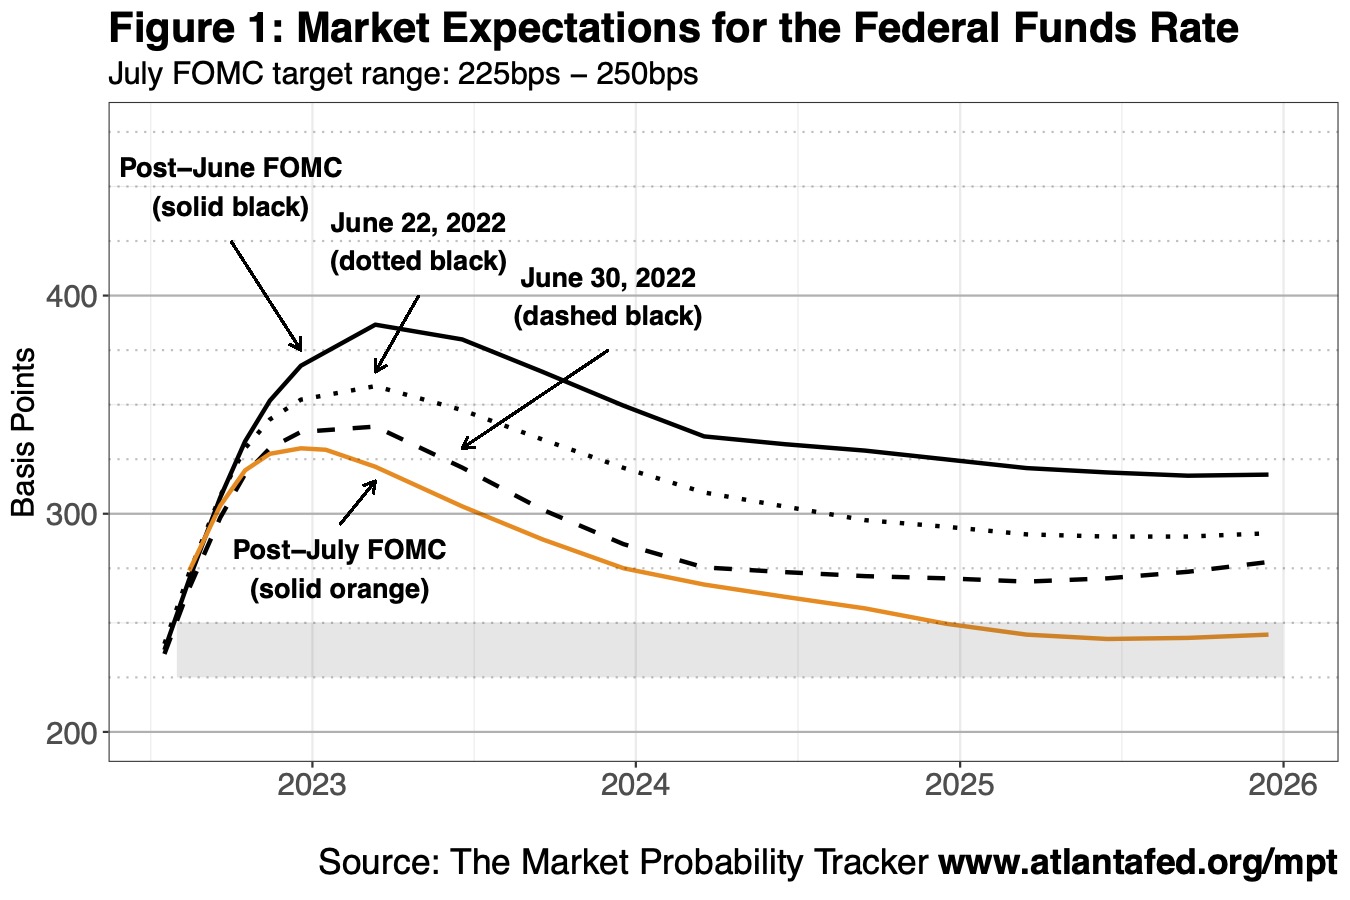 Chart 1 of 3: Market Expecations for the Federal Funds Rate